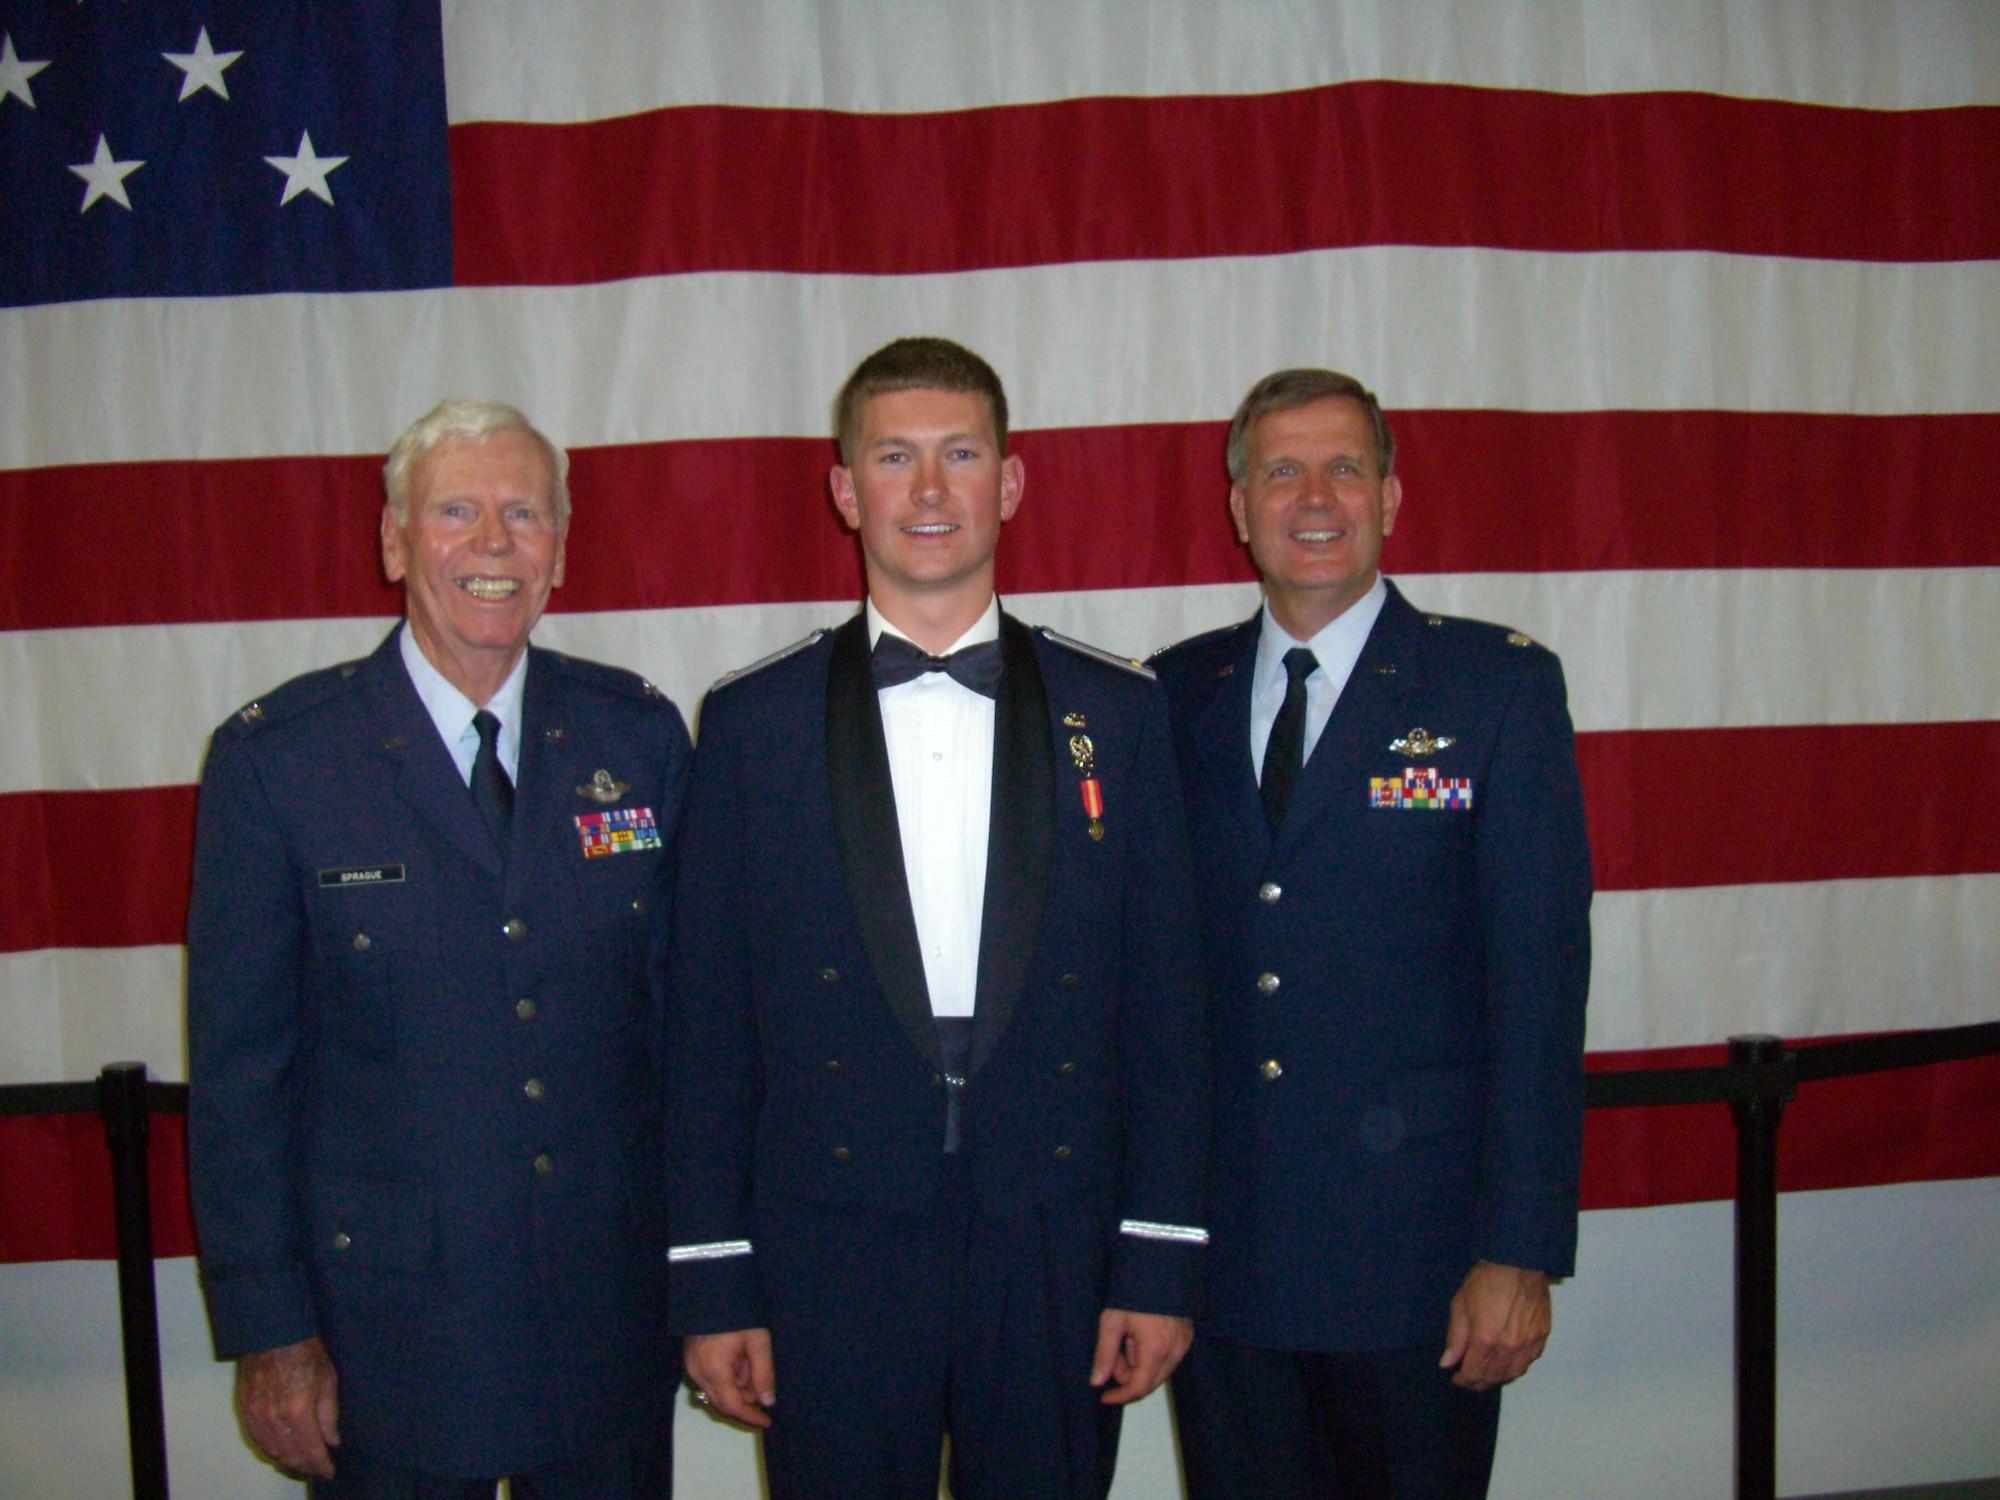 MINOT AIR FORCE BASE, N.D. -- Col. Don Sprague (USAF, Retired); Capt. Daniel Welch, 23rd Bomb Squadron Pilot, and Col. Don Welch (USAF, Ret.), represent three generations of B-52 Stratofortress pilots. They are the embodiment of the continued power and capabilities of the buff, which live on to this day. (Courtesy photo)